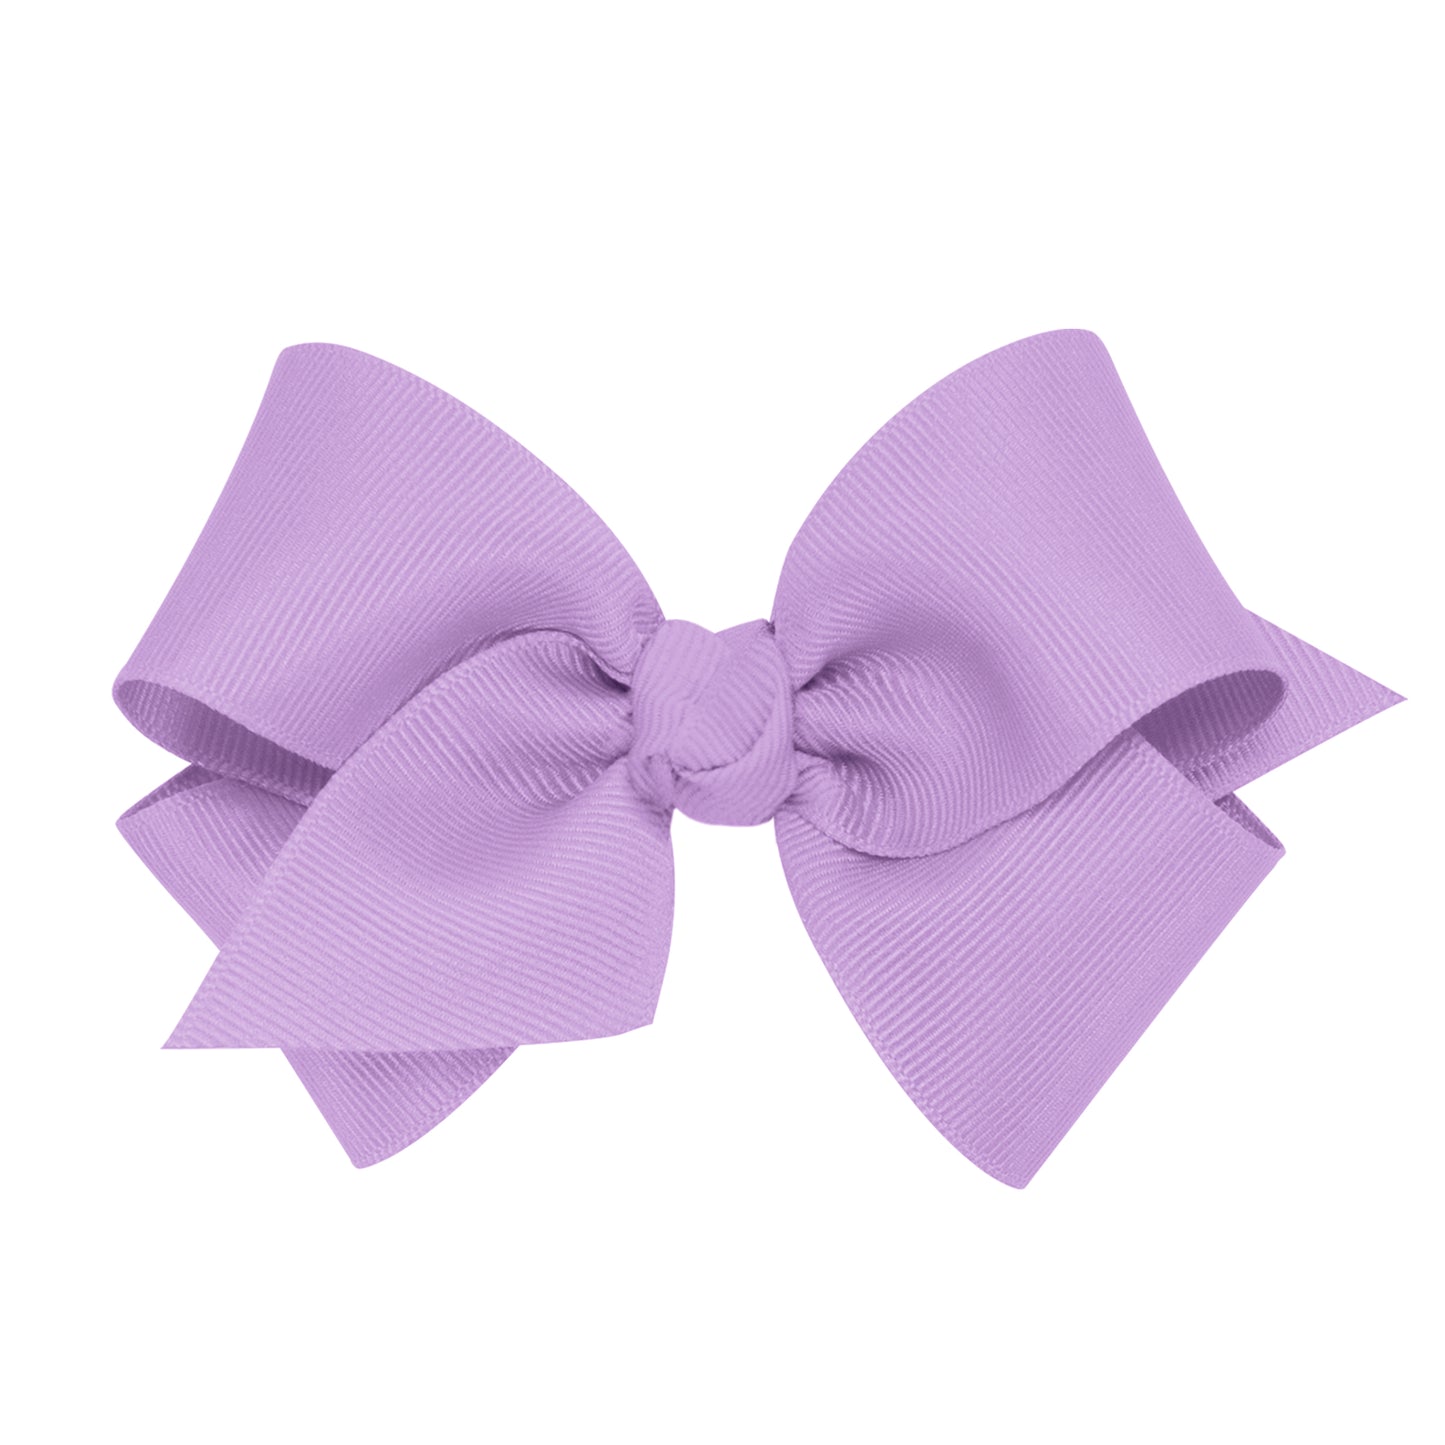 Small Grosgrain Hair Bow with Center Knot - Light Orchid